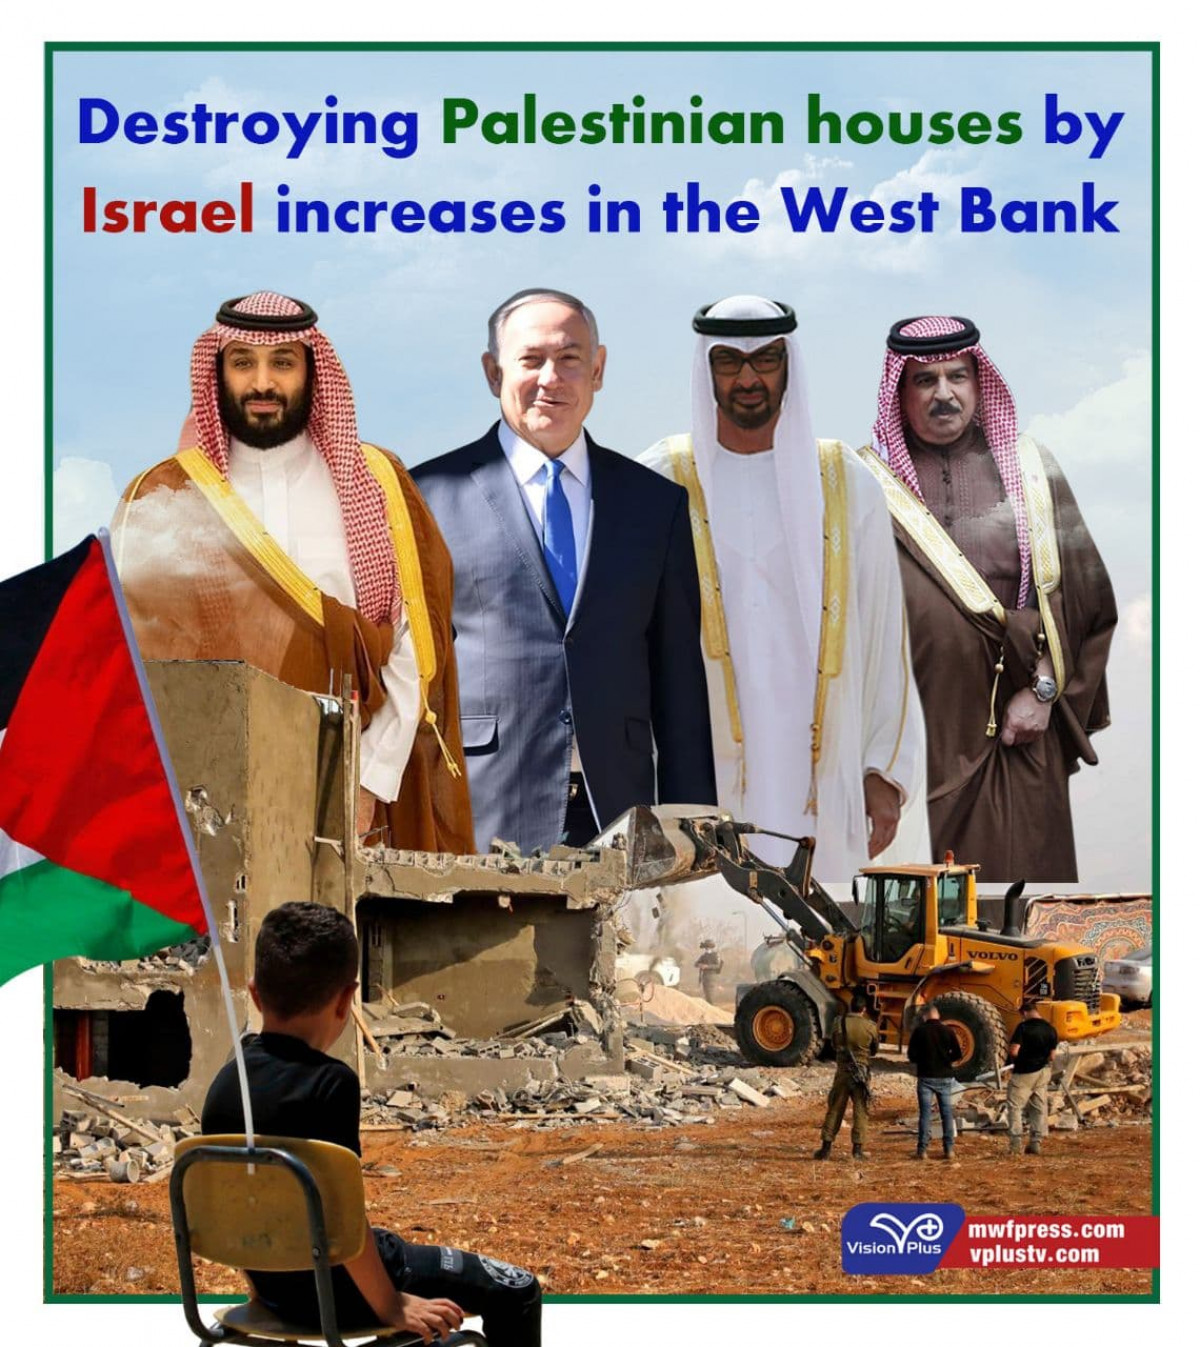 Destroying Palestinians homes increases by Israel in the West Bank